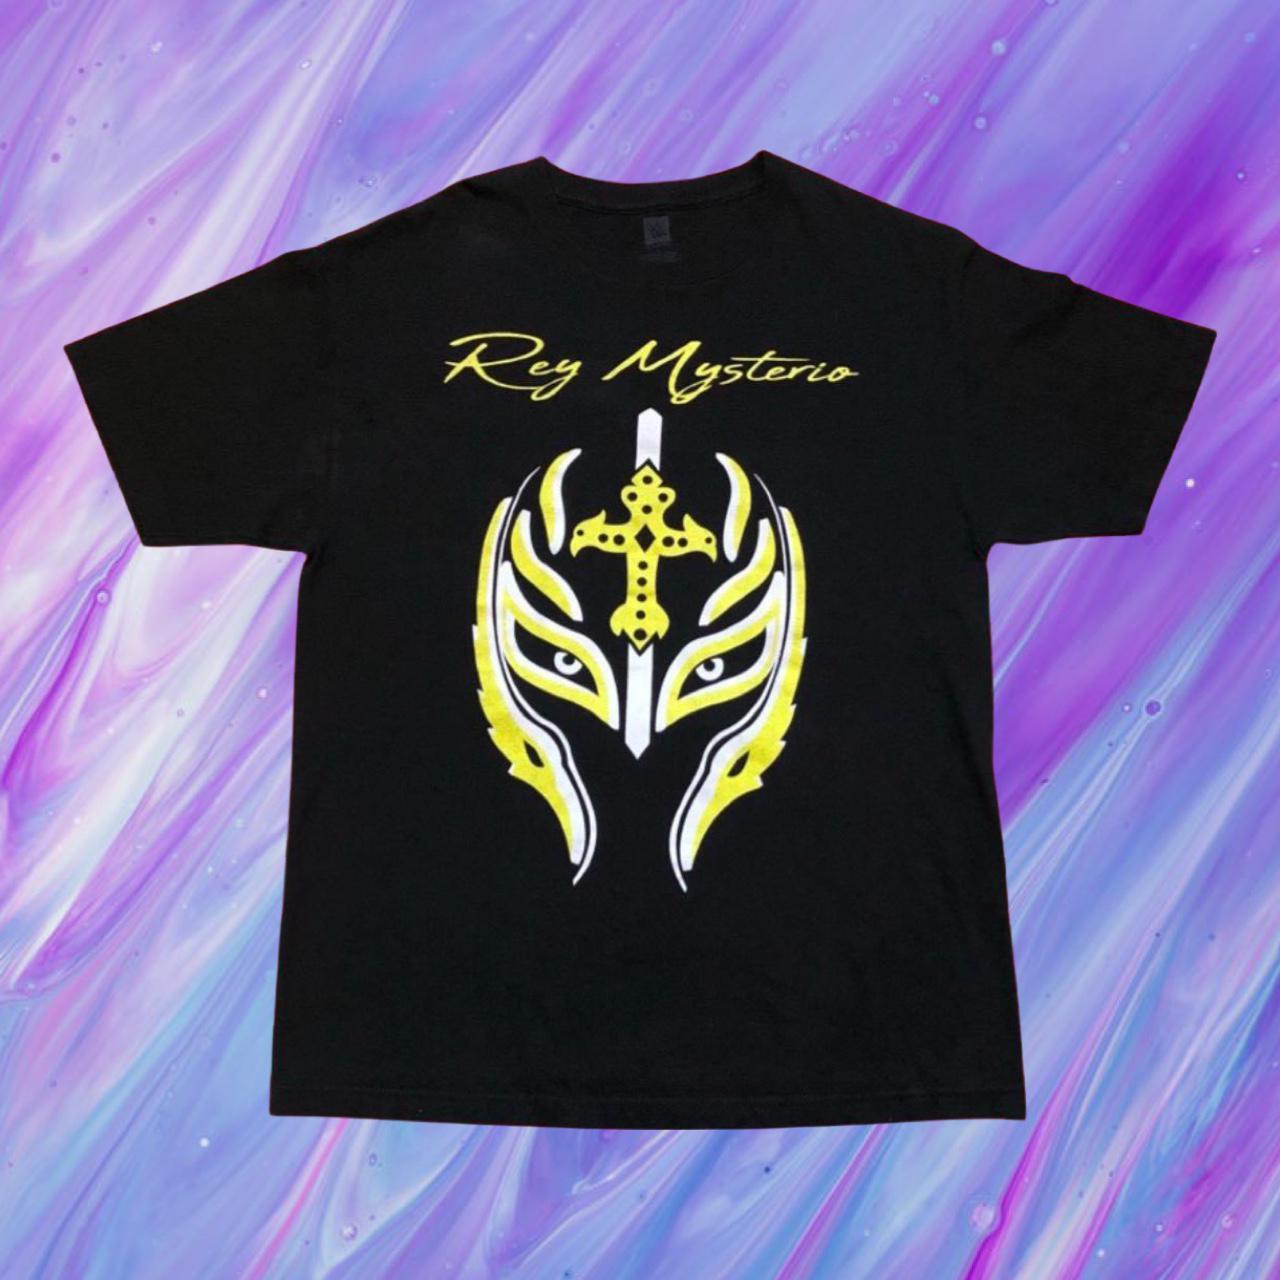 Product Image 1 - REY MYSTERIO WWE T-Shirt 

•Size